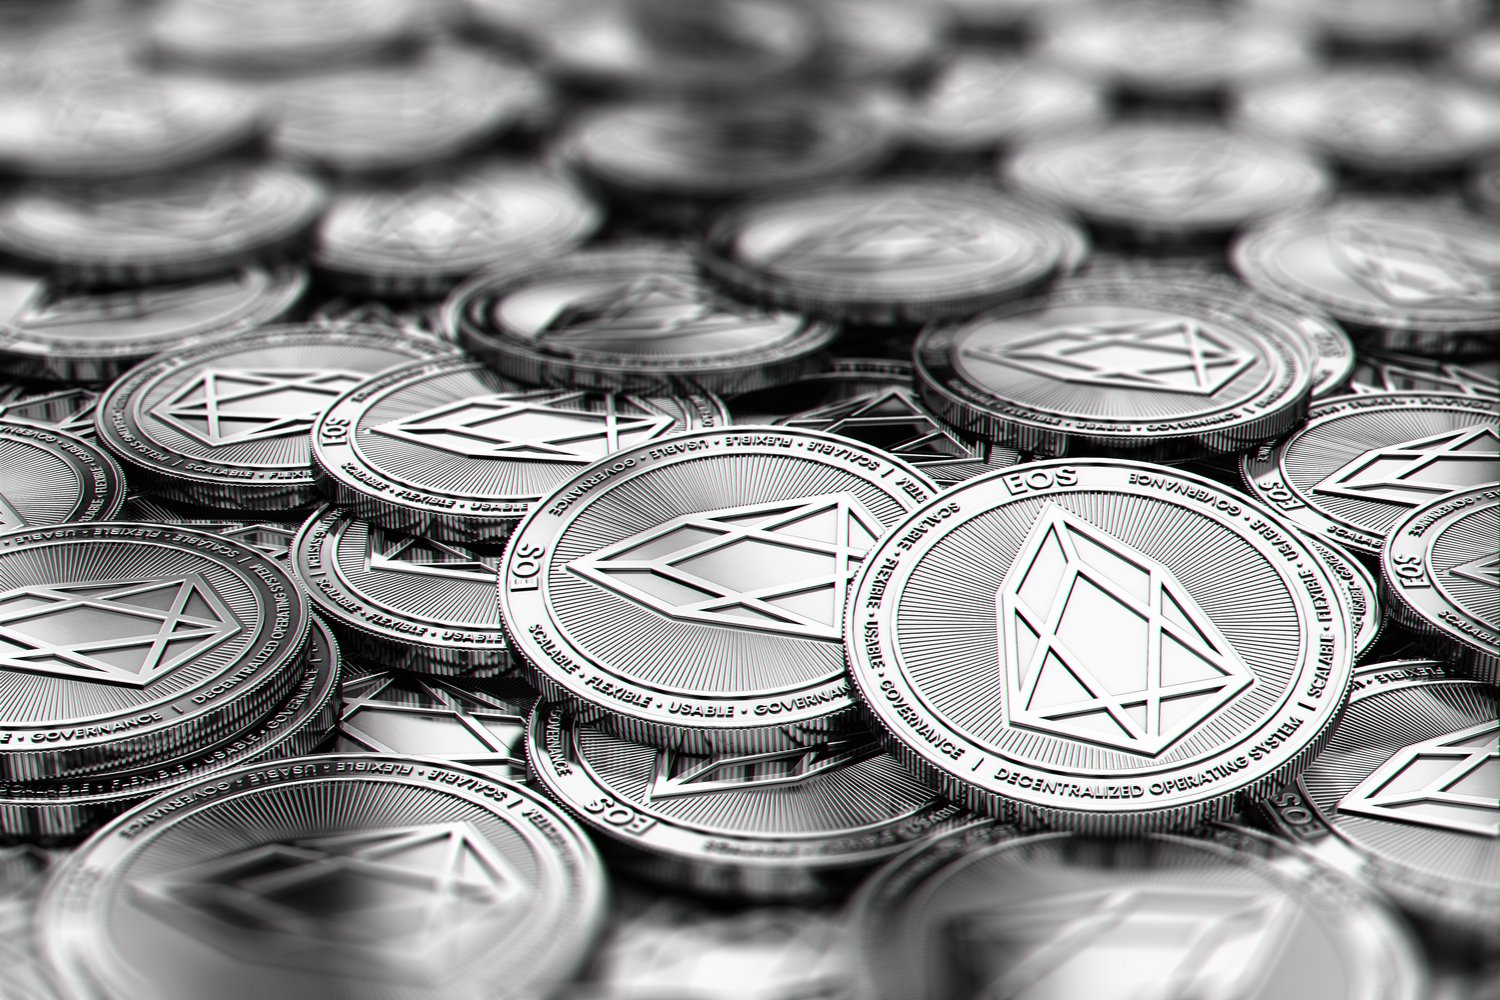 EOS Block Producers Move To Cut Costs For Users